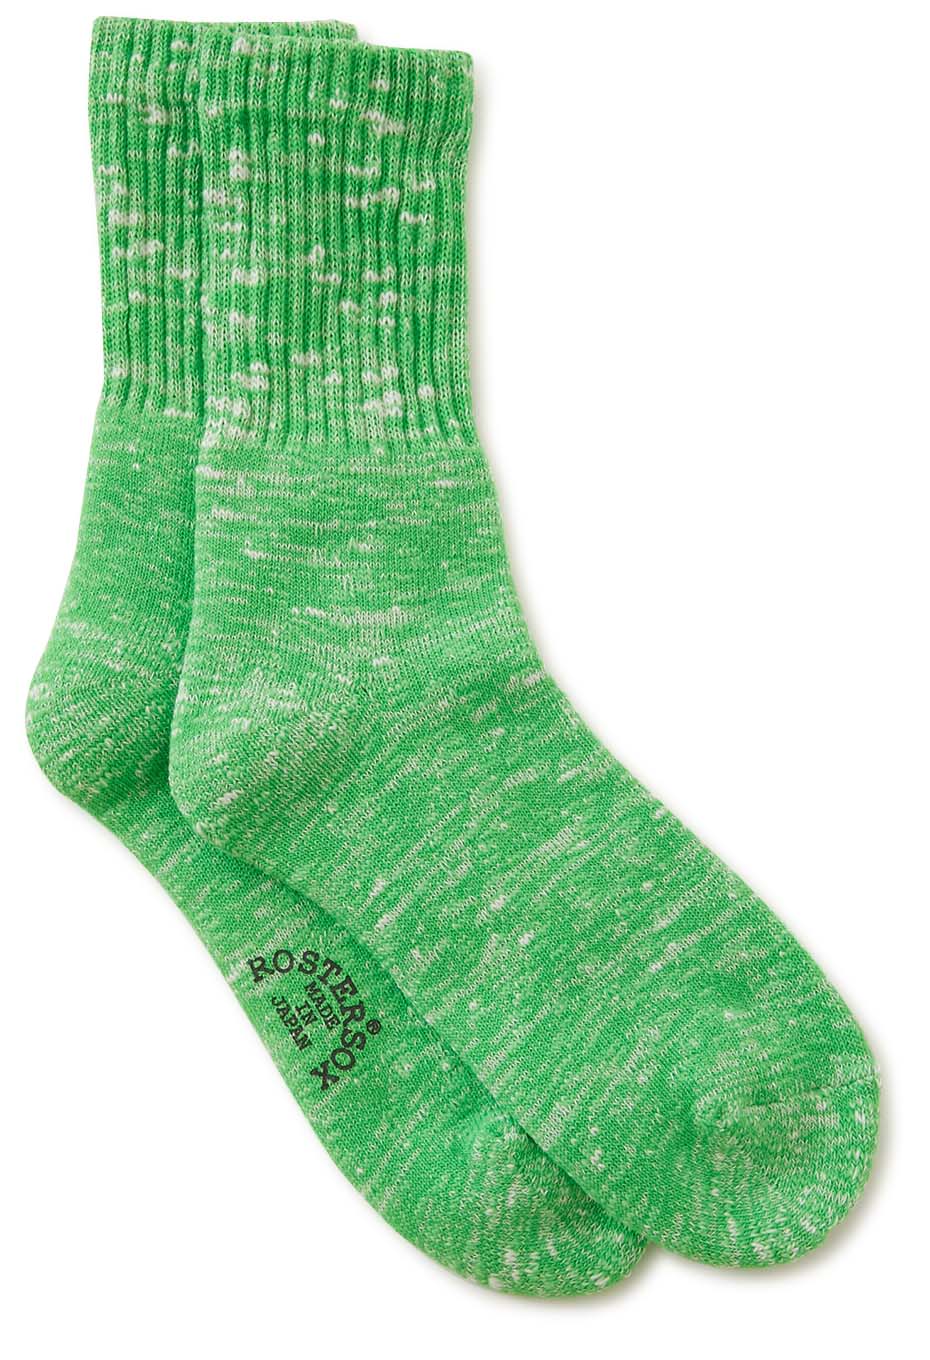 ROSTER SOX B NEO SOCKS RS-260